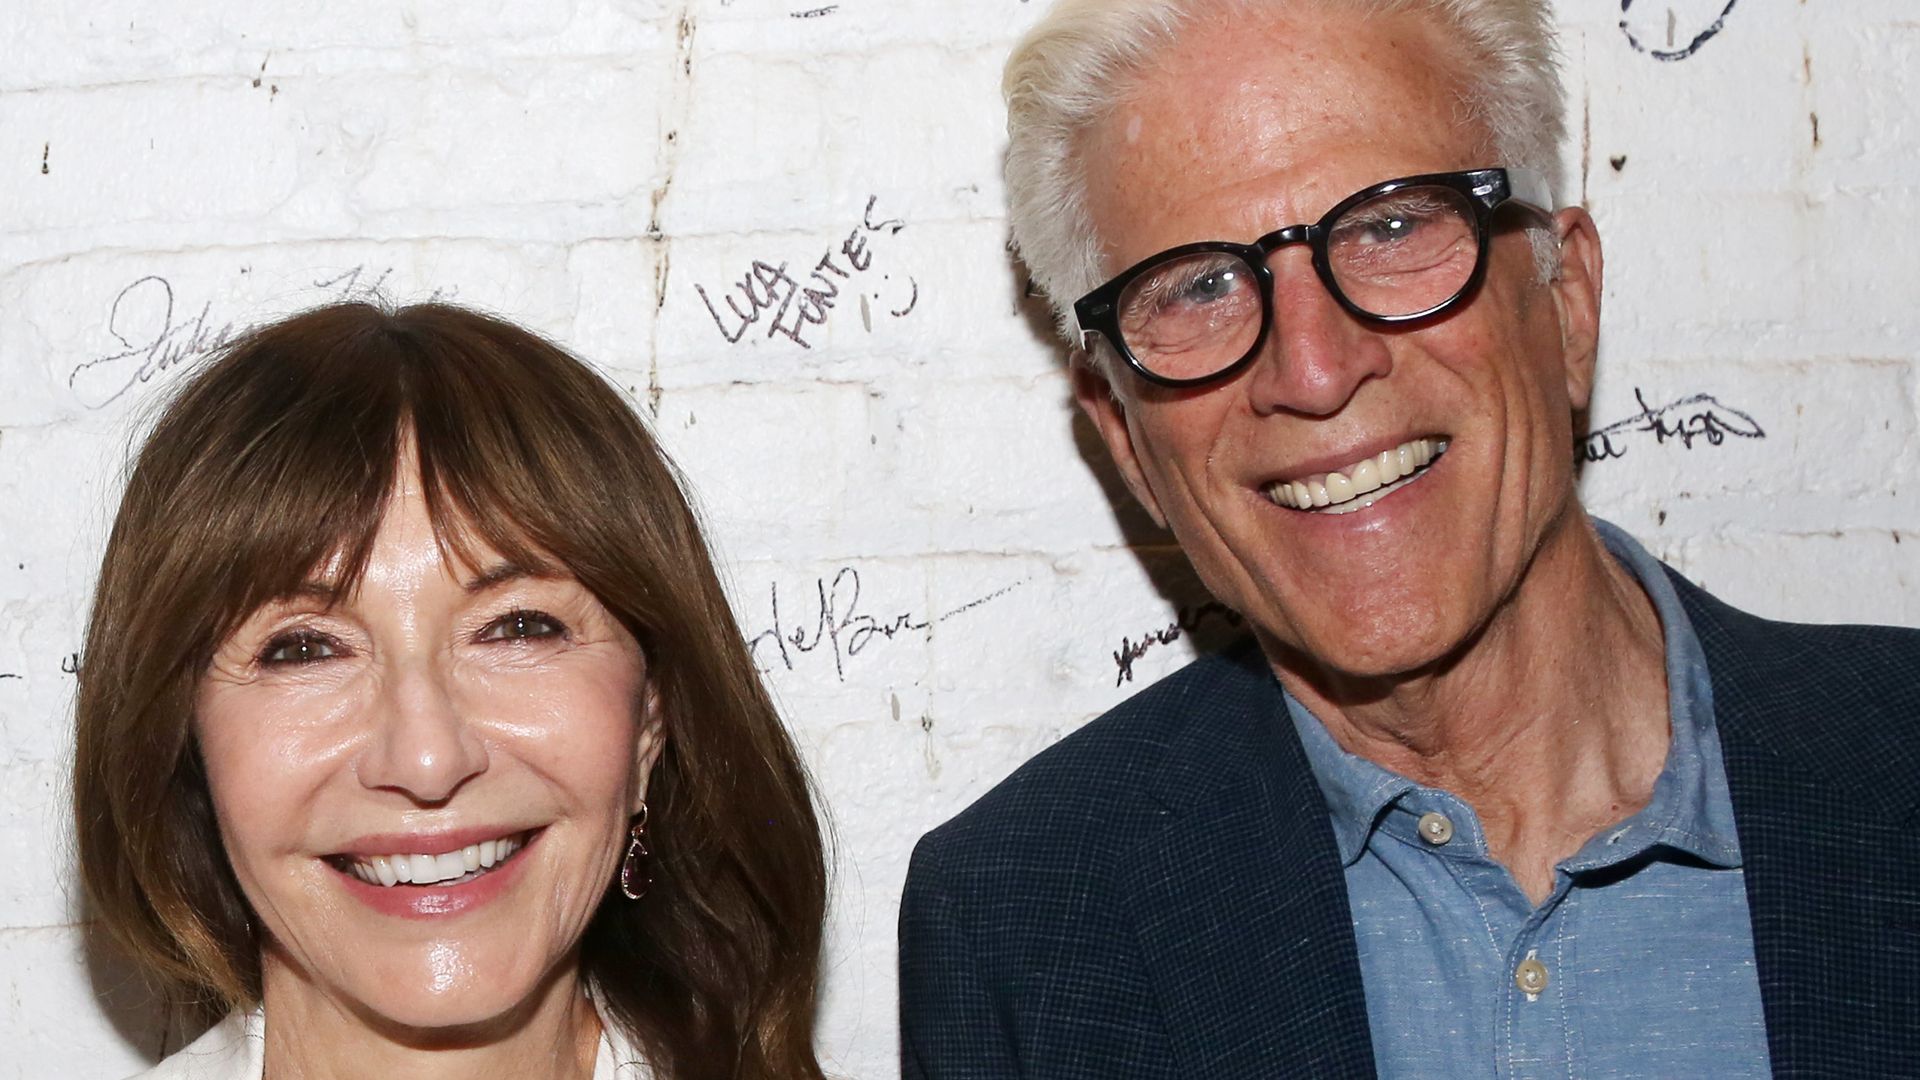 Ted Danson smiling with his wife Mary Steenburgen